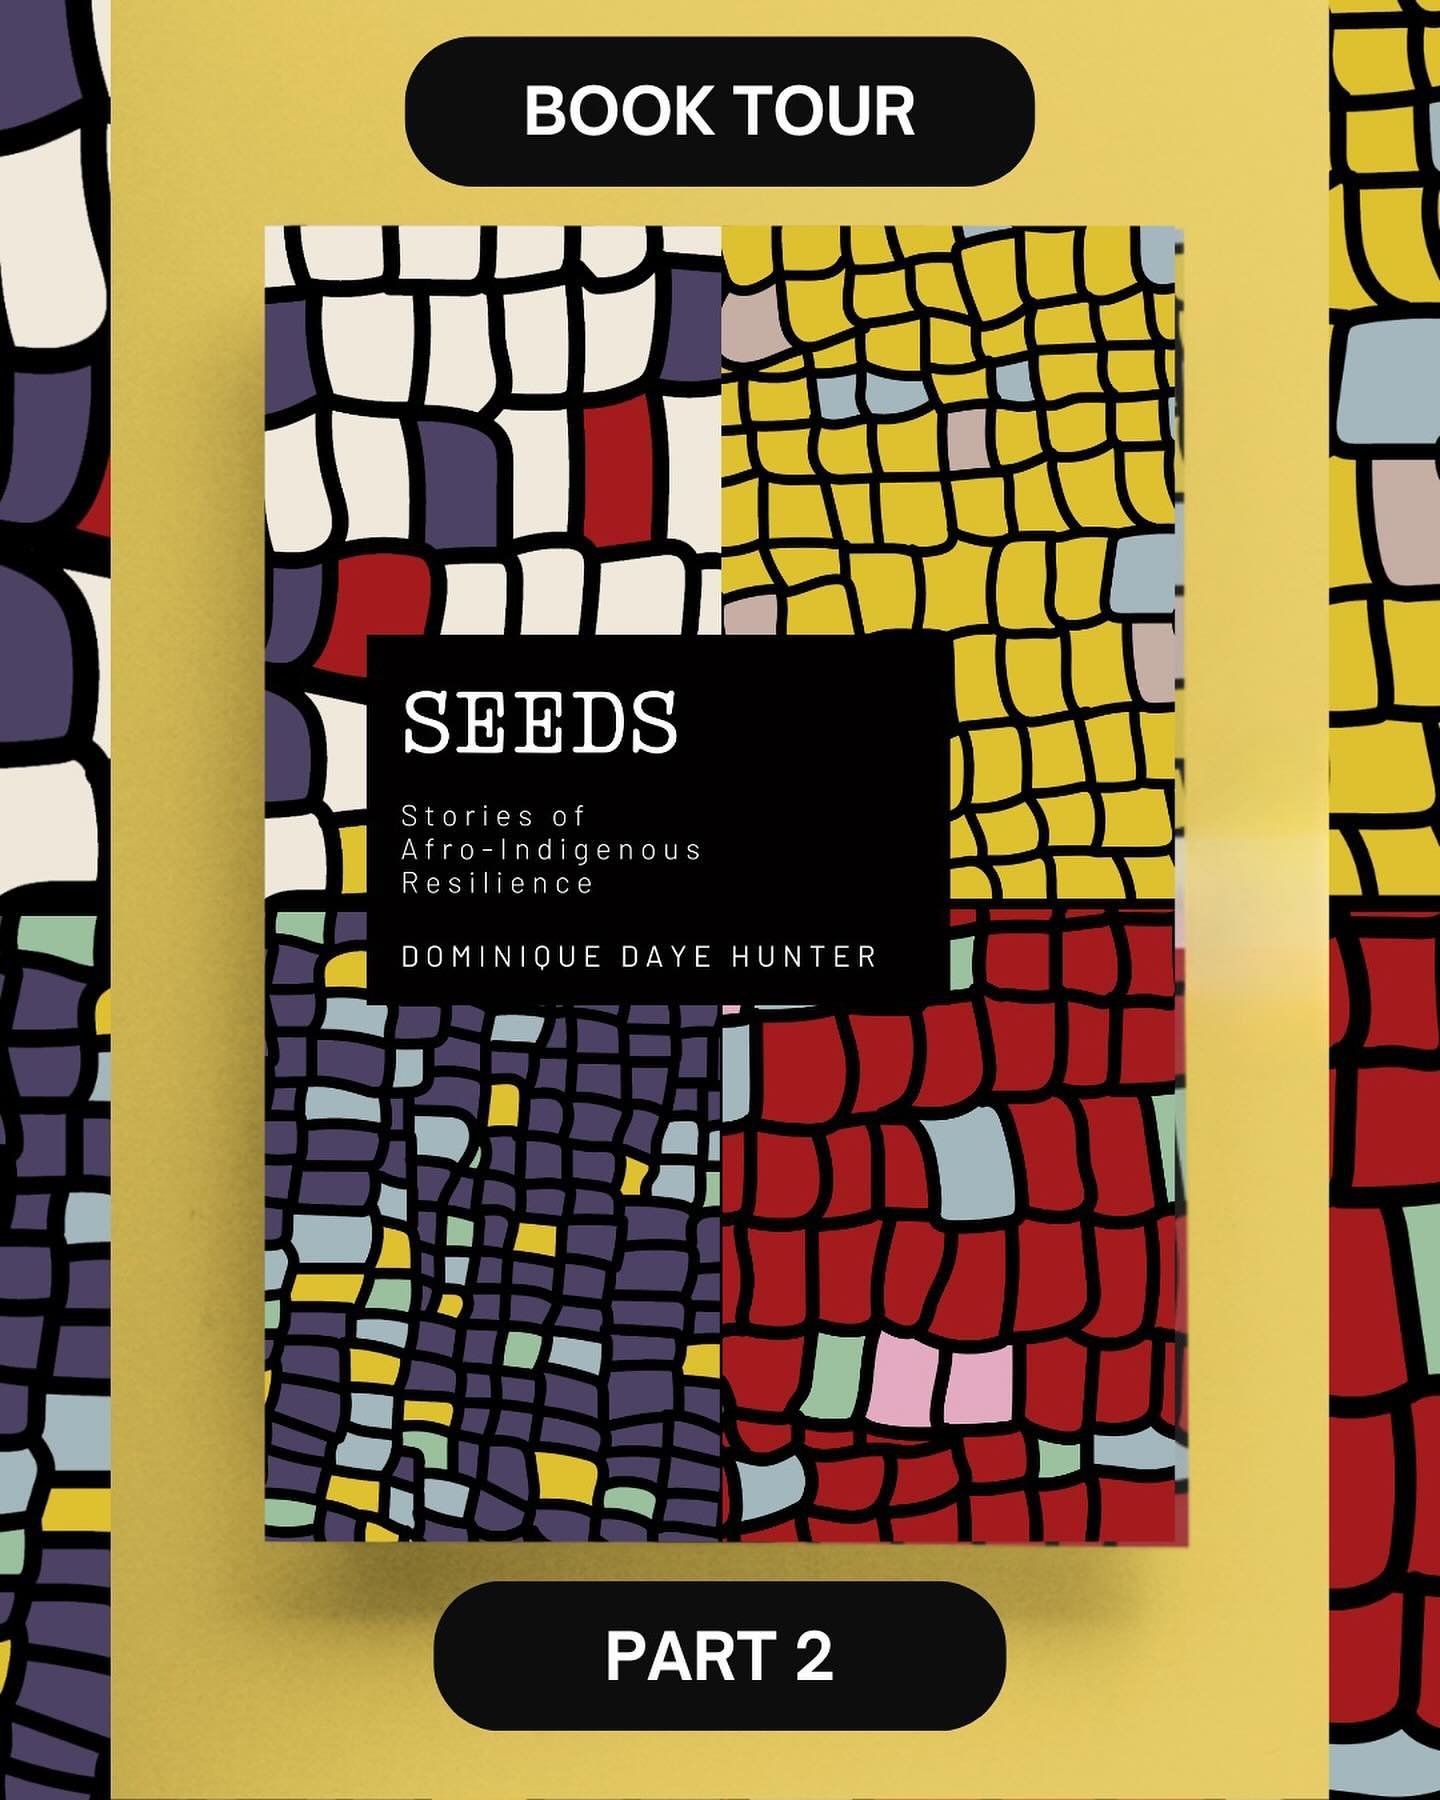 🌻 📣 Announcing Part 2 of the Seeds Book Tour: we&rsquo;re coming to the southwest, y&rsquo;all ! 🏜️🐍

1. May 2nd: Institute of American Indian Arts Bookstore Signing + Reading @iaia_bookstore @instituteofamericanindianarts 

2. May 5th: Palabras 